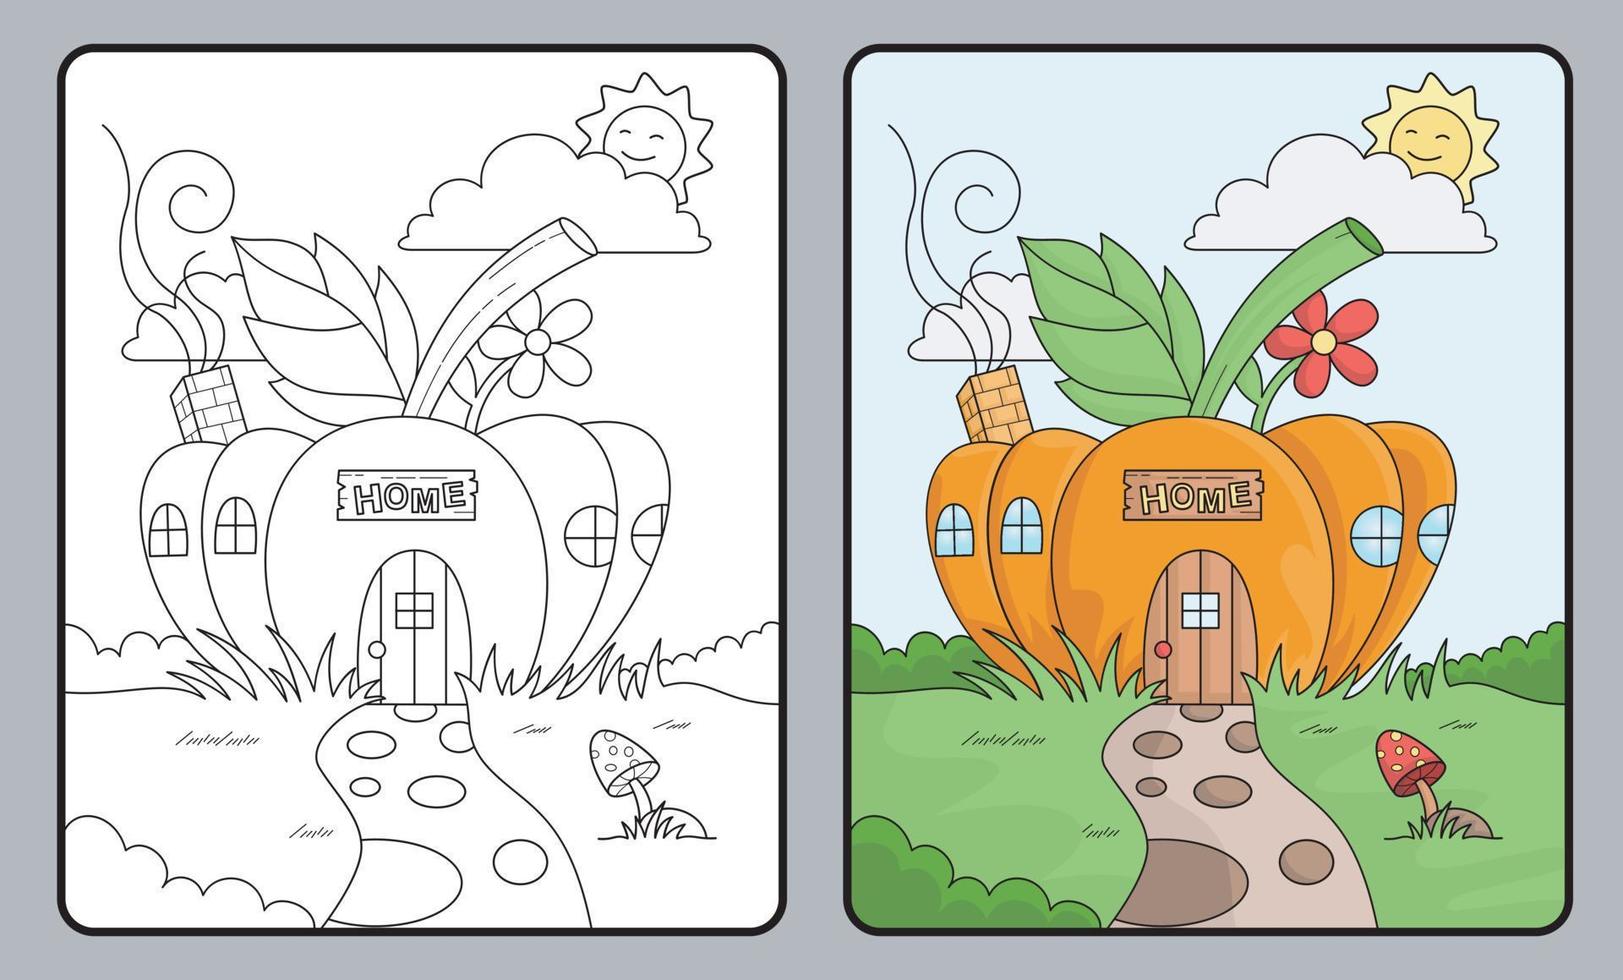 pumpkin house coloring book or page, educational for kids vector